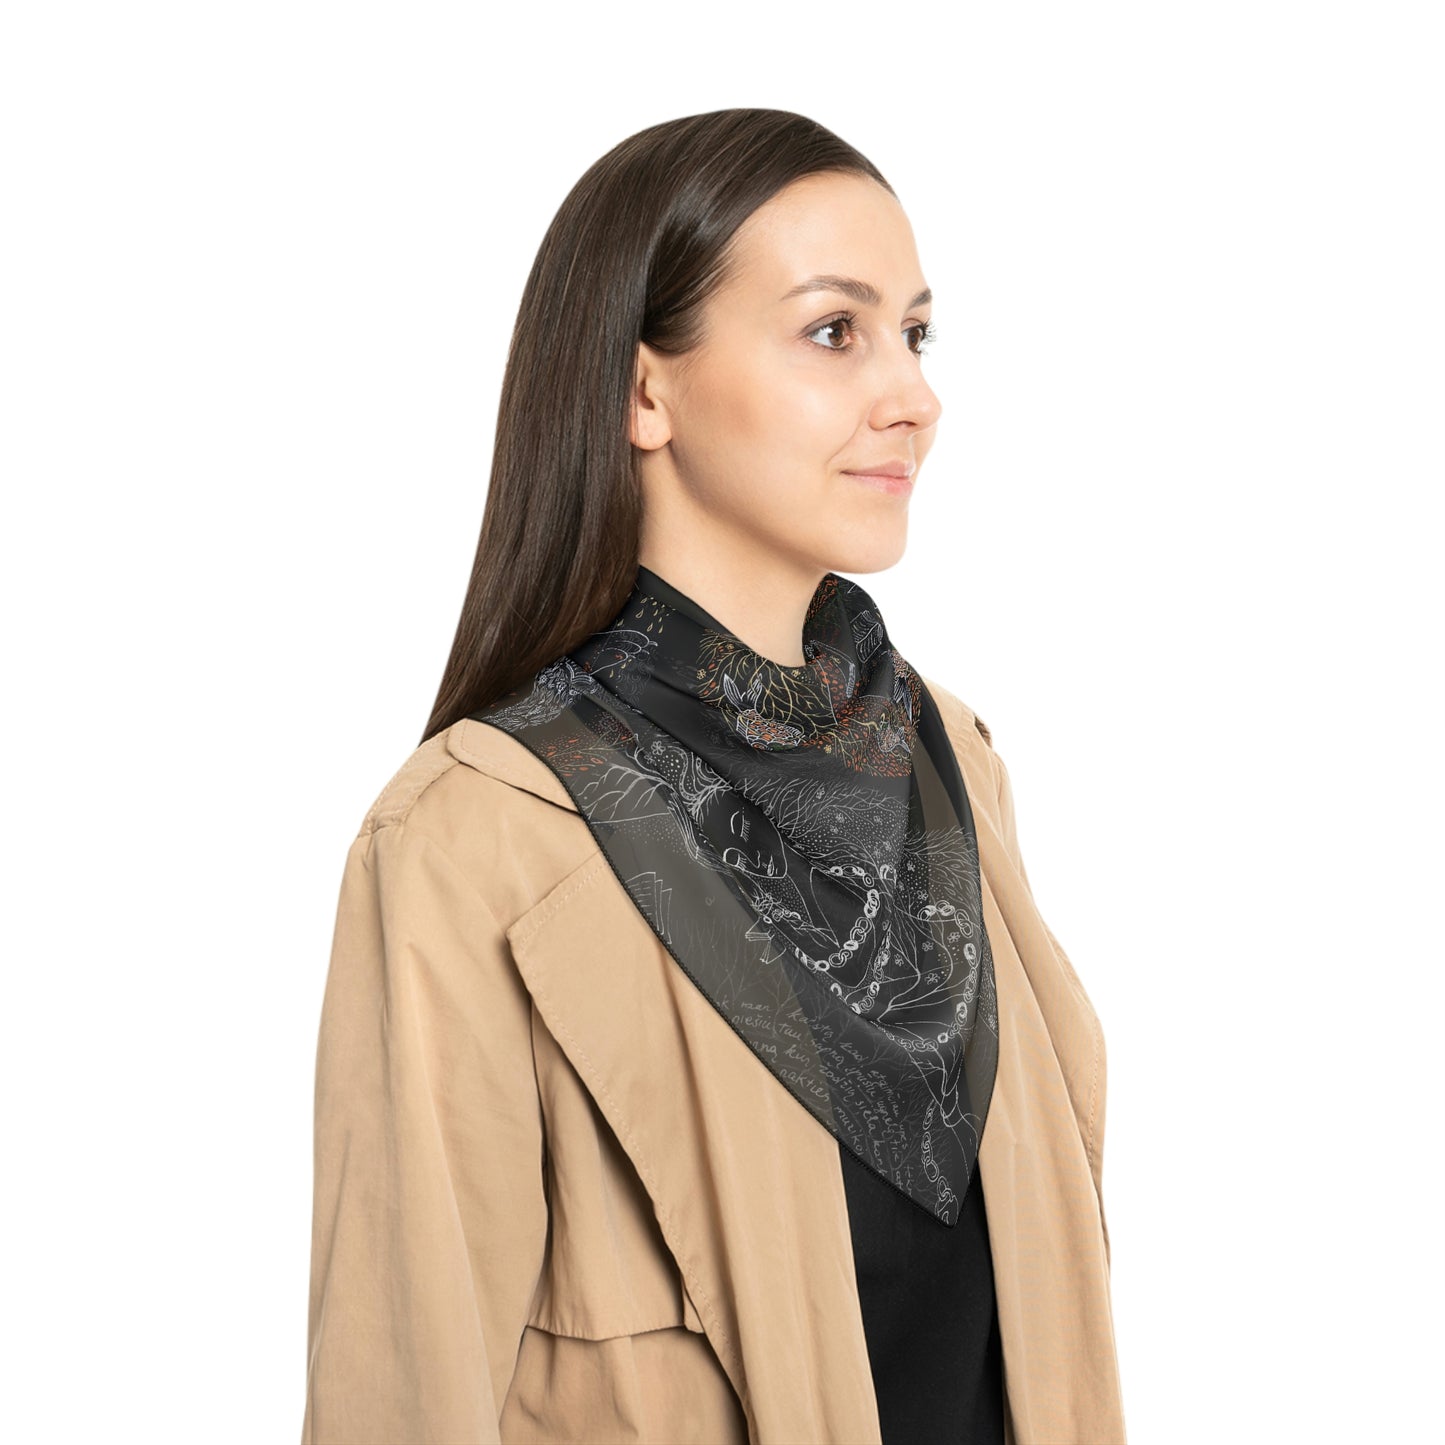 Chinese Years Zodiac Sign Poly Scarf (Cat)